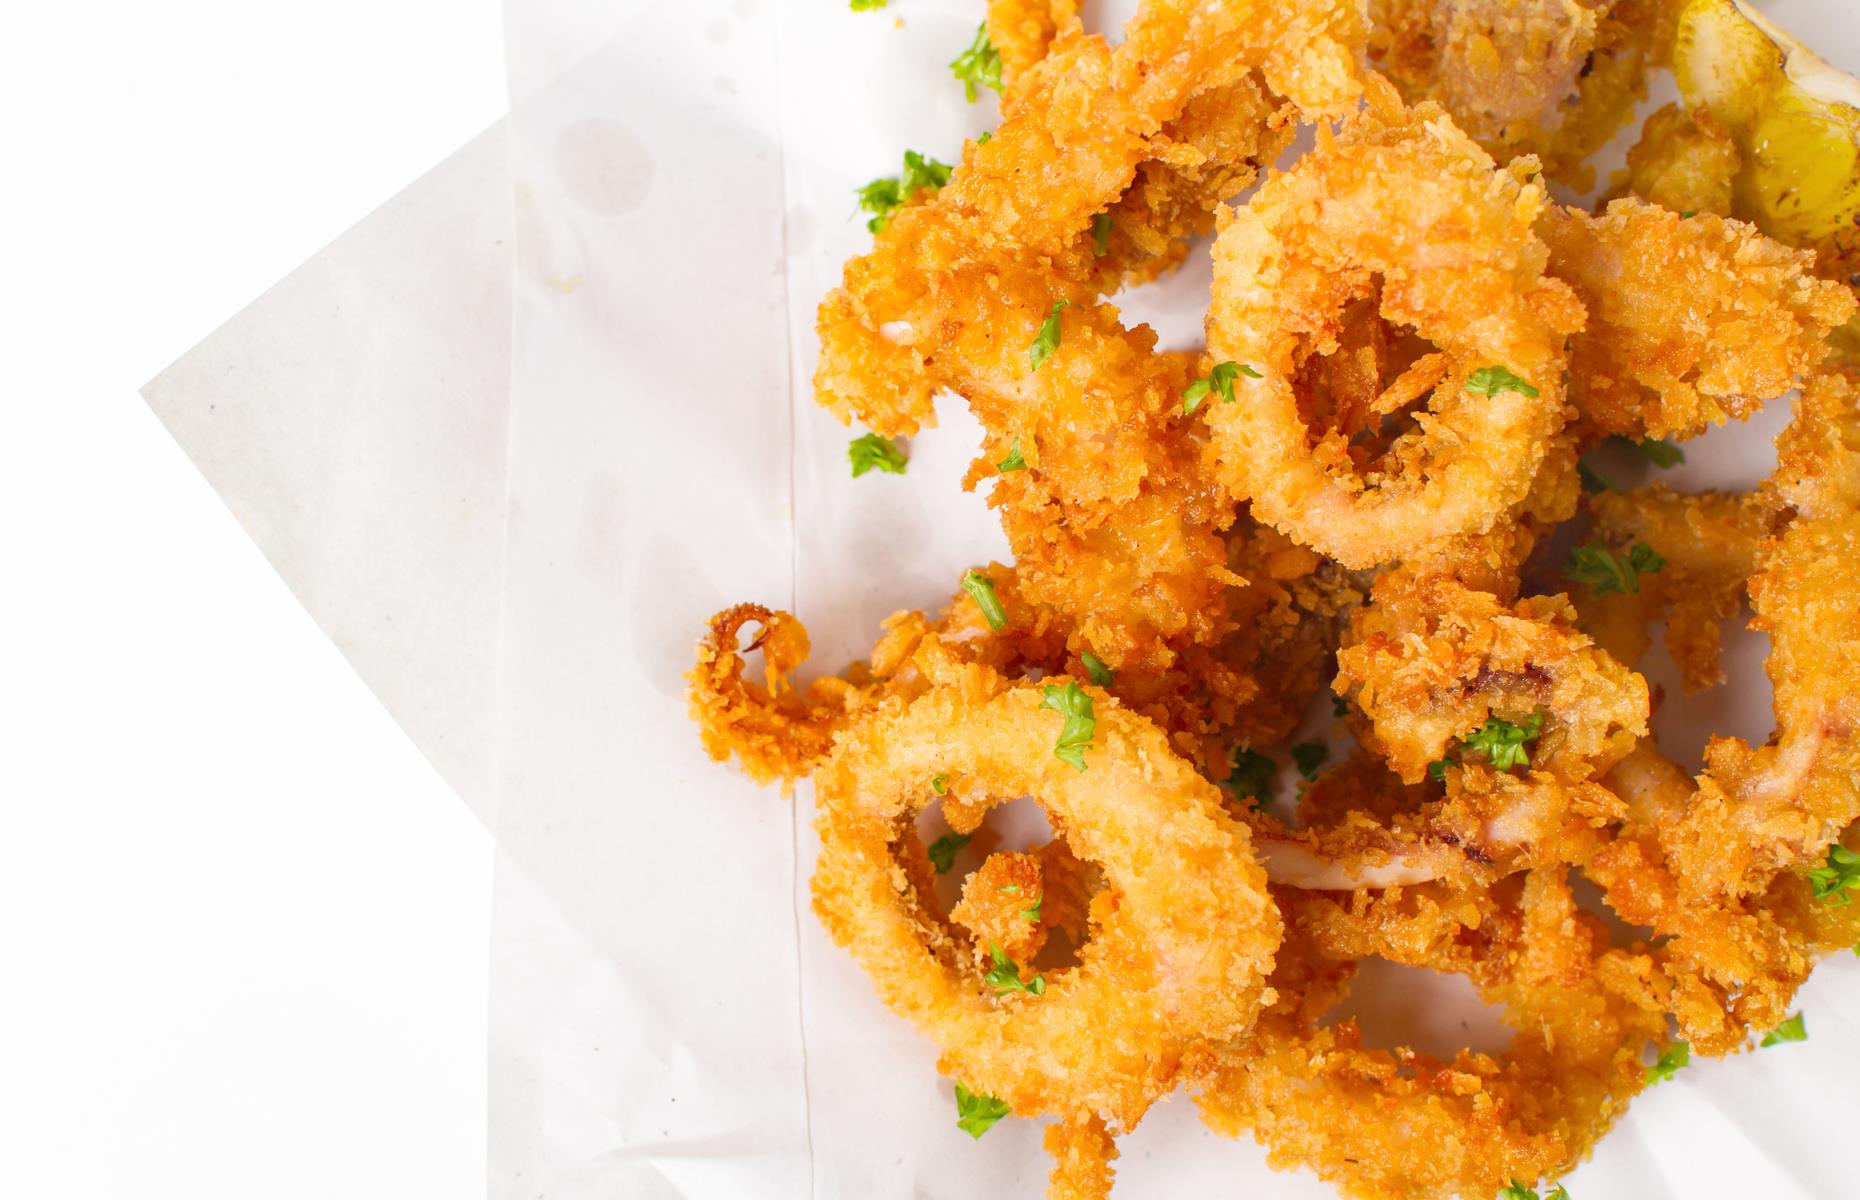 <p>America’s smallest state punches above its weight when it comes to delicious produce and it’s especially famed for seafood fresh from the Atlantic and pulled in daily by local fishing boats. Specifically, it’s known for small, sweet, delicate-tasting squid, served battered and fried in bite-size pieces. Calamari became the <a href="https://www.towndock.com/blog/calamari-becomes-rhode-islands-official-state-appetizer">official state appetizer</a> in 2014, reflecting its popularity and importance to the economy.</p>